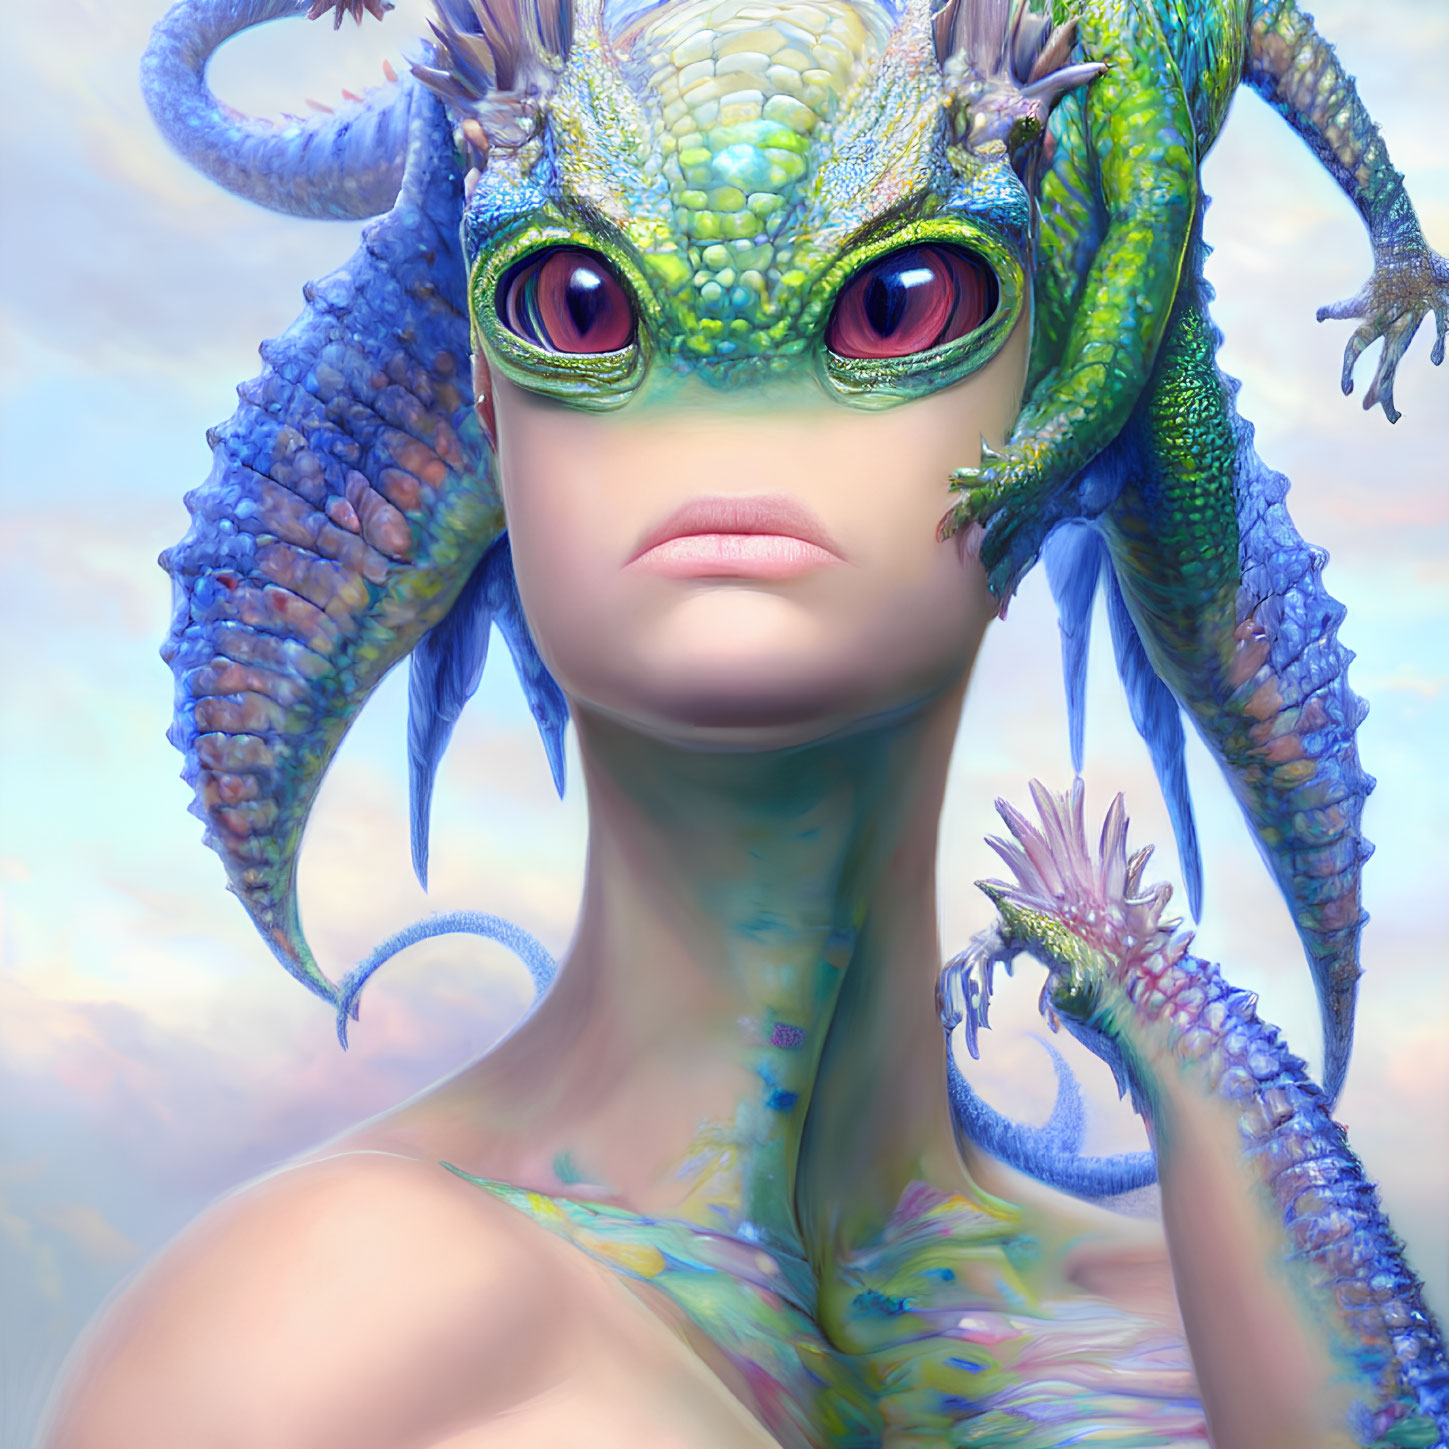 Fantasy portrait of humanoid creature with green reptilian skin and blue scales